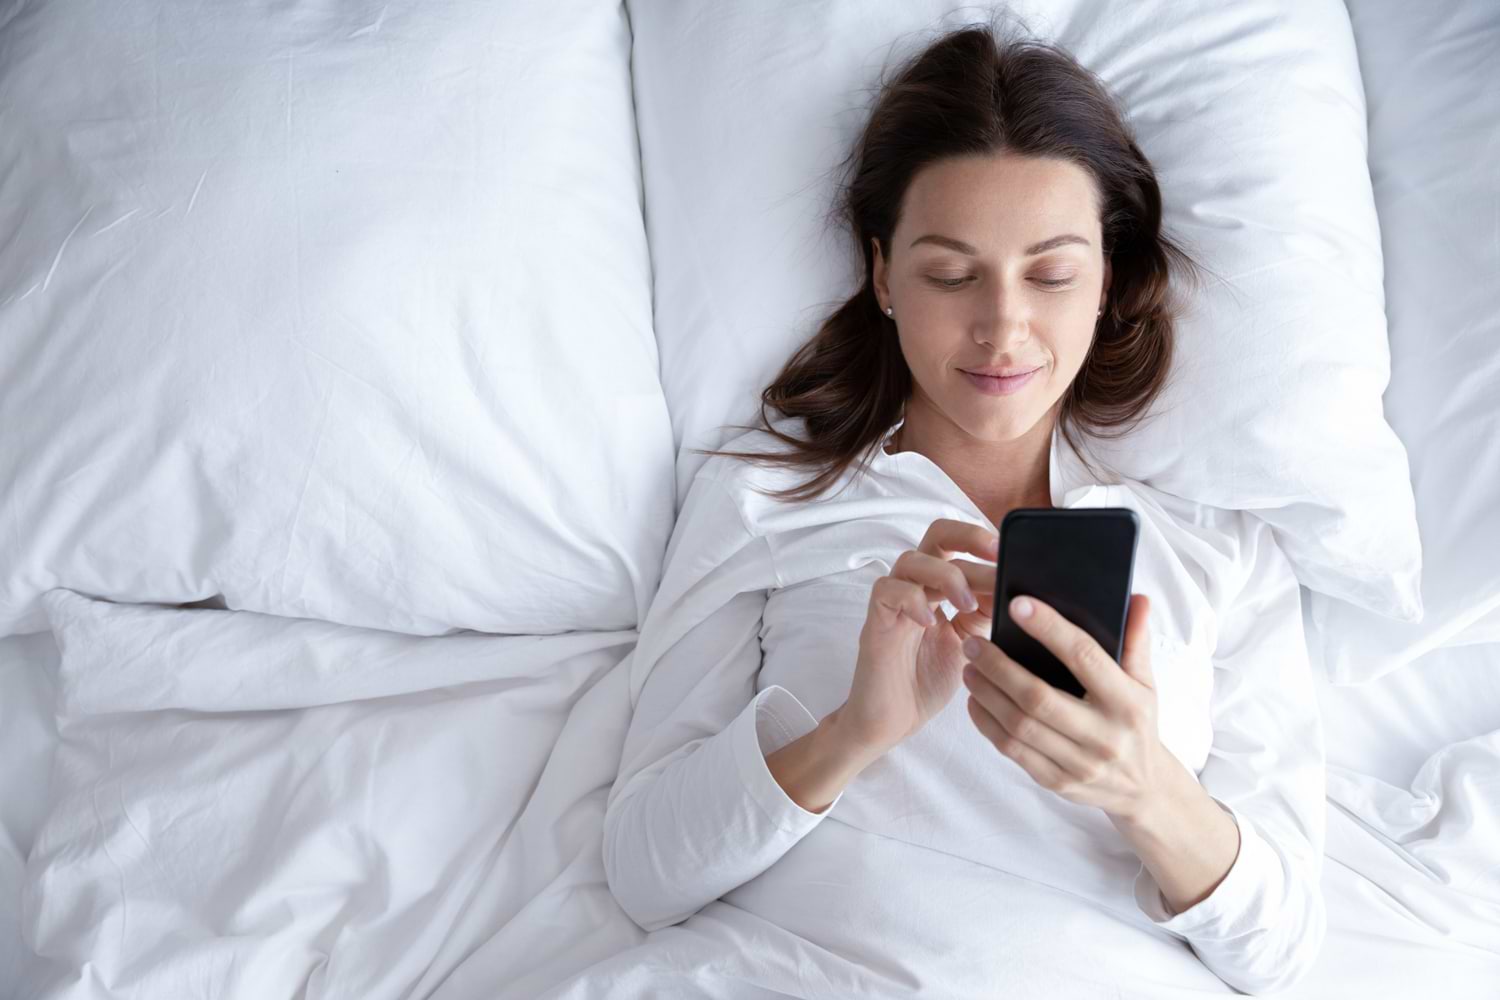 5-SLEEP-APPS-TO-HELP-YOU-FALL-ASLEEP-FASTER-IN-2021-WHICH-ONE-IS-RIGHT-FOR-YOU